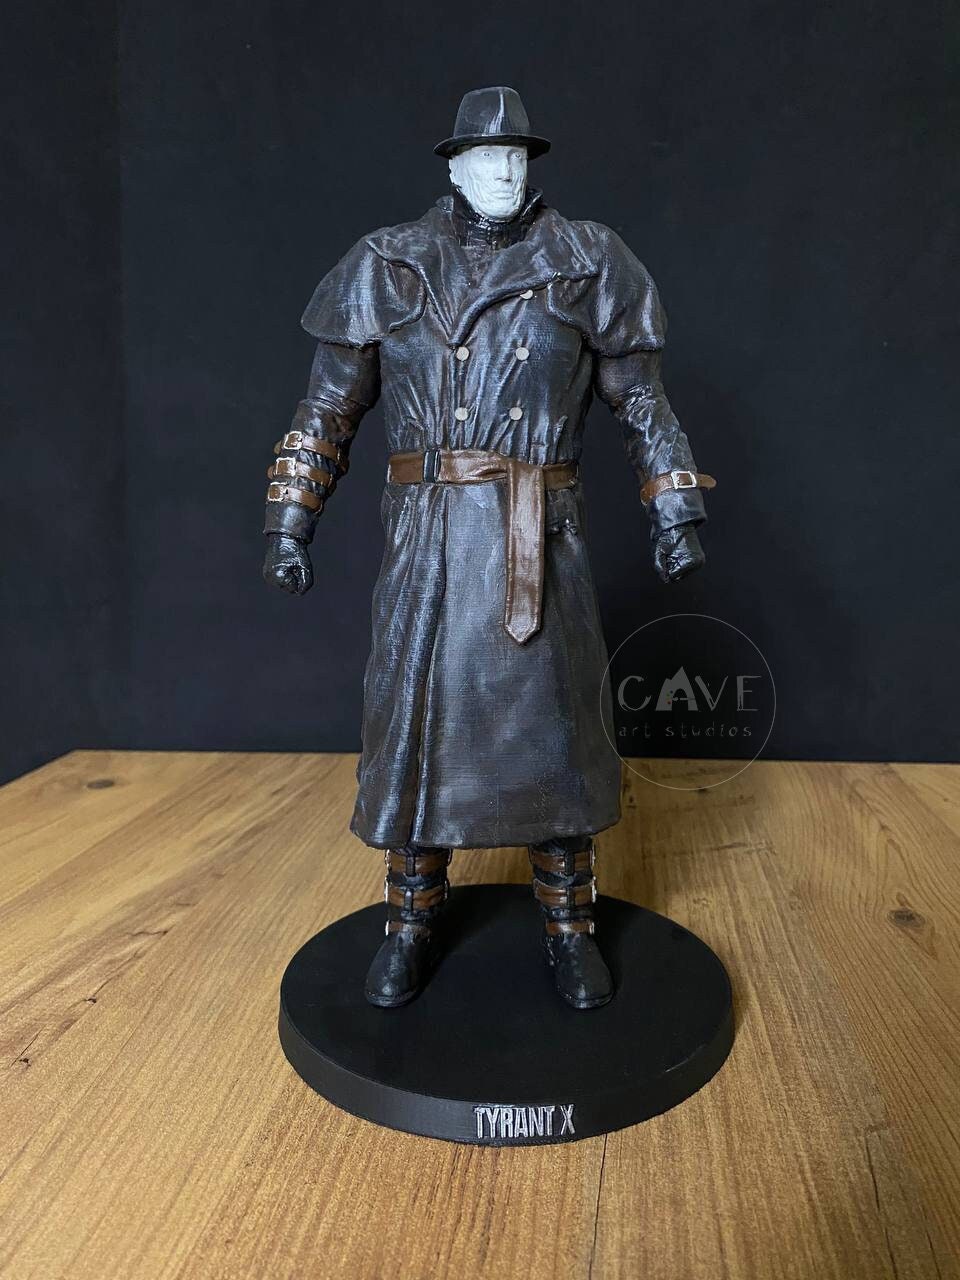 This 'Resident Evil 2' Fan-Made Mr. X Sculpture is a Thing of Terrifying  Beauty